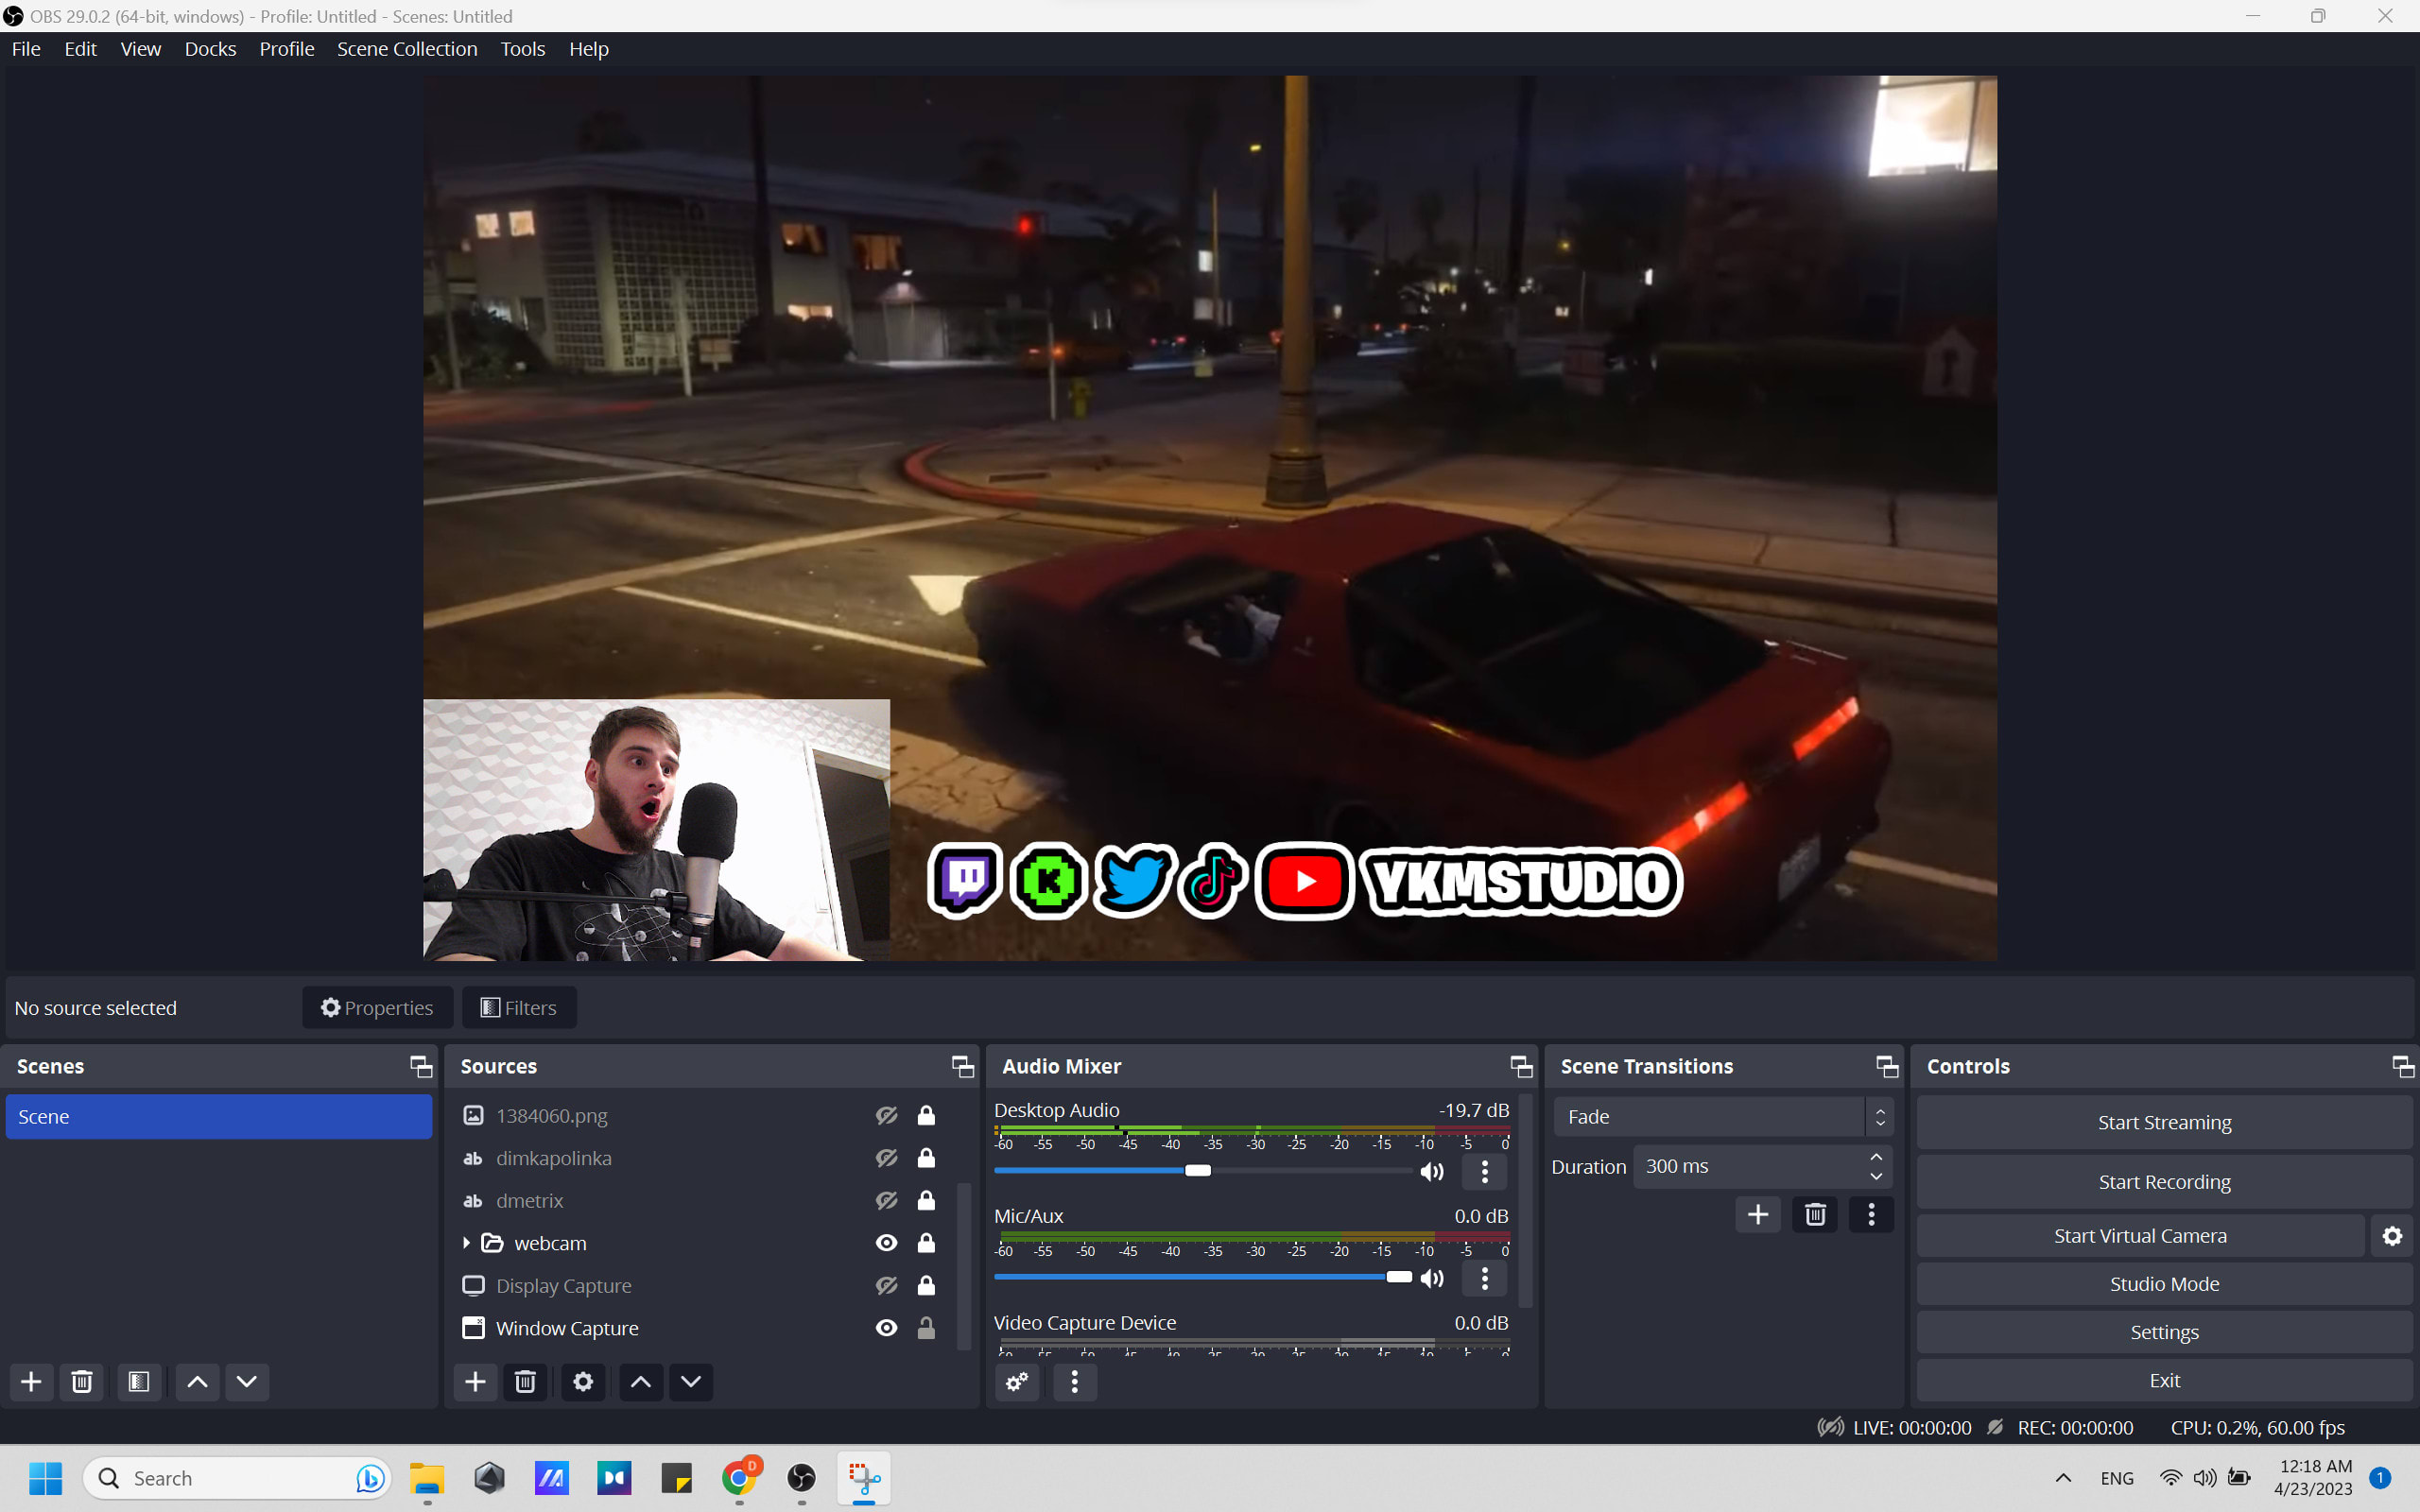 Create a social media overlay like adin ross and ishowspeed for twitch   by Gxniushd